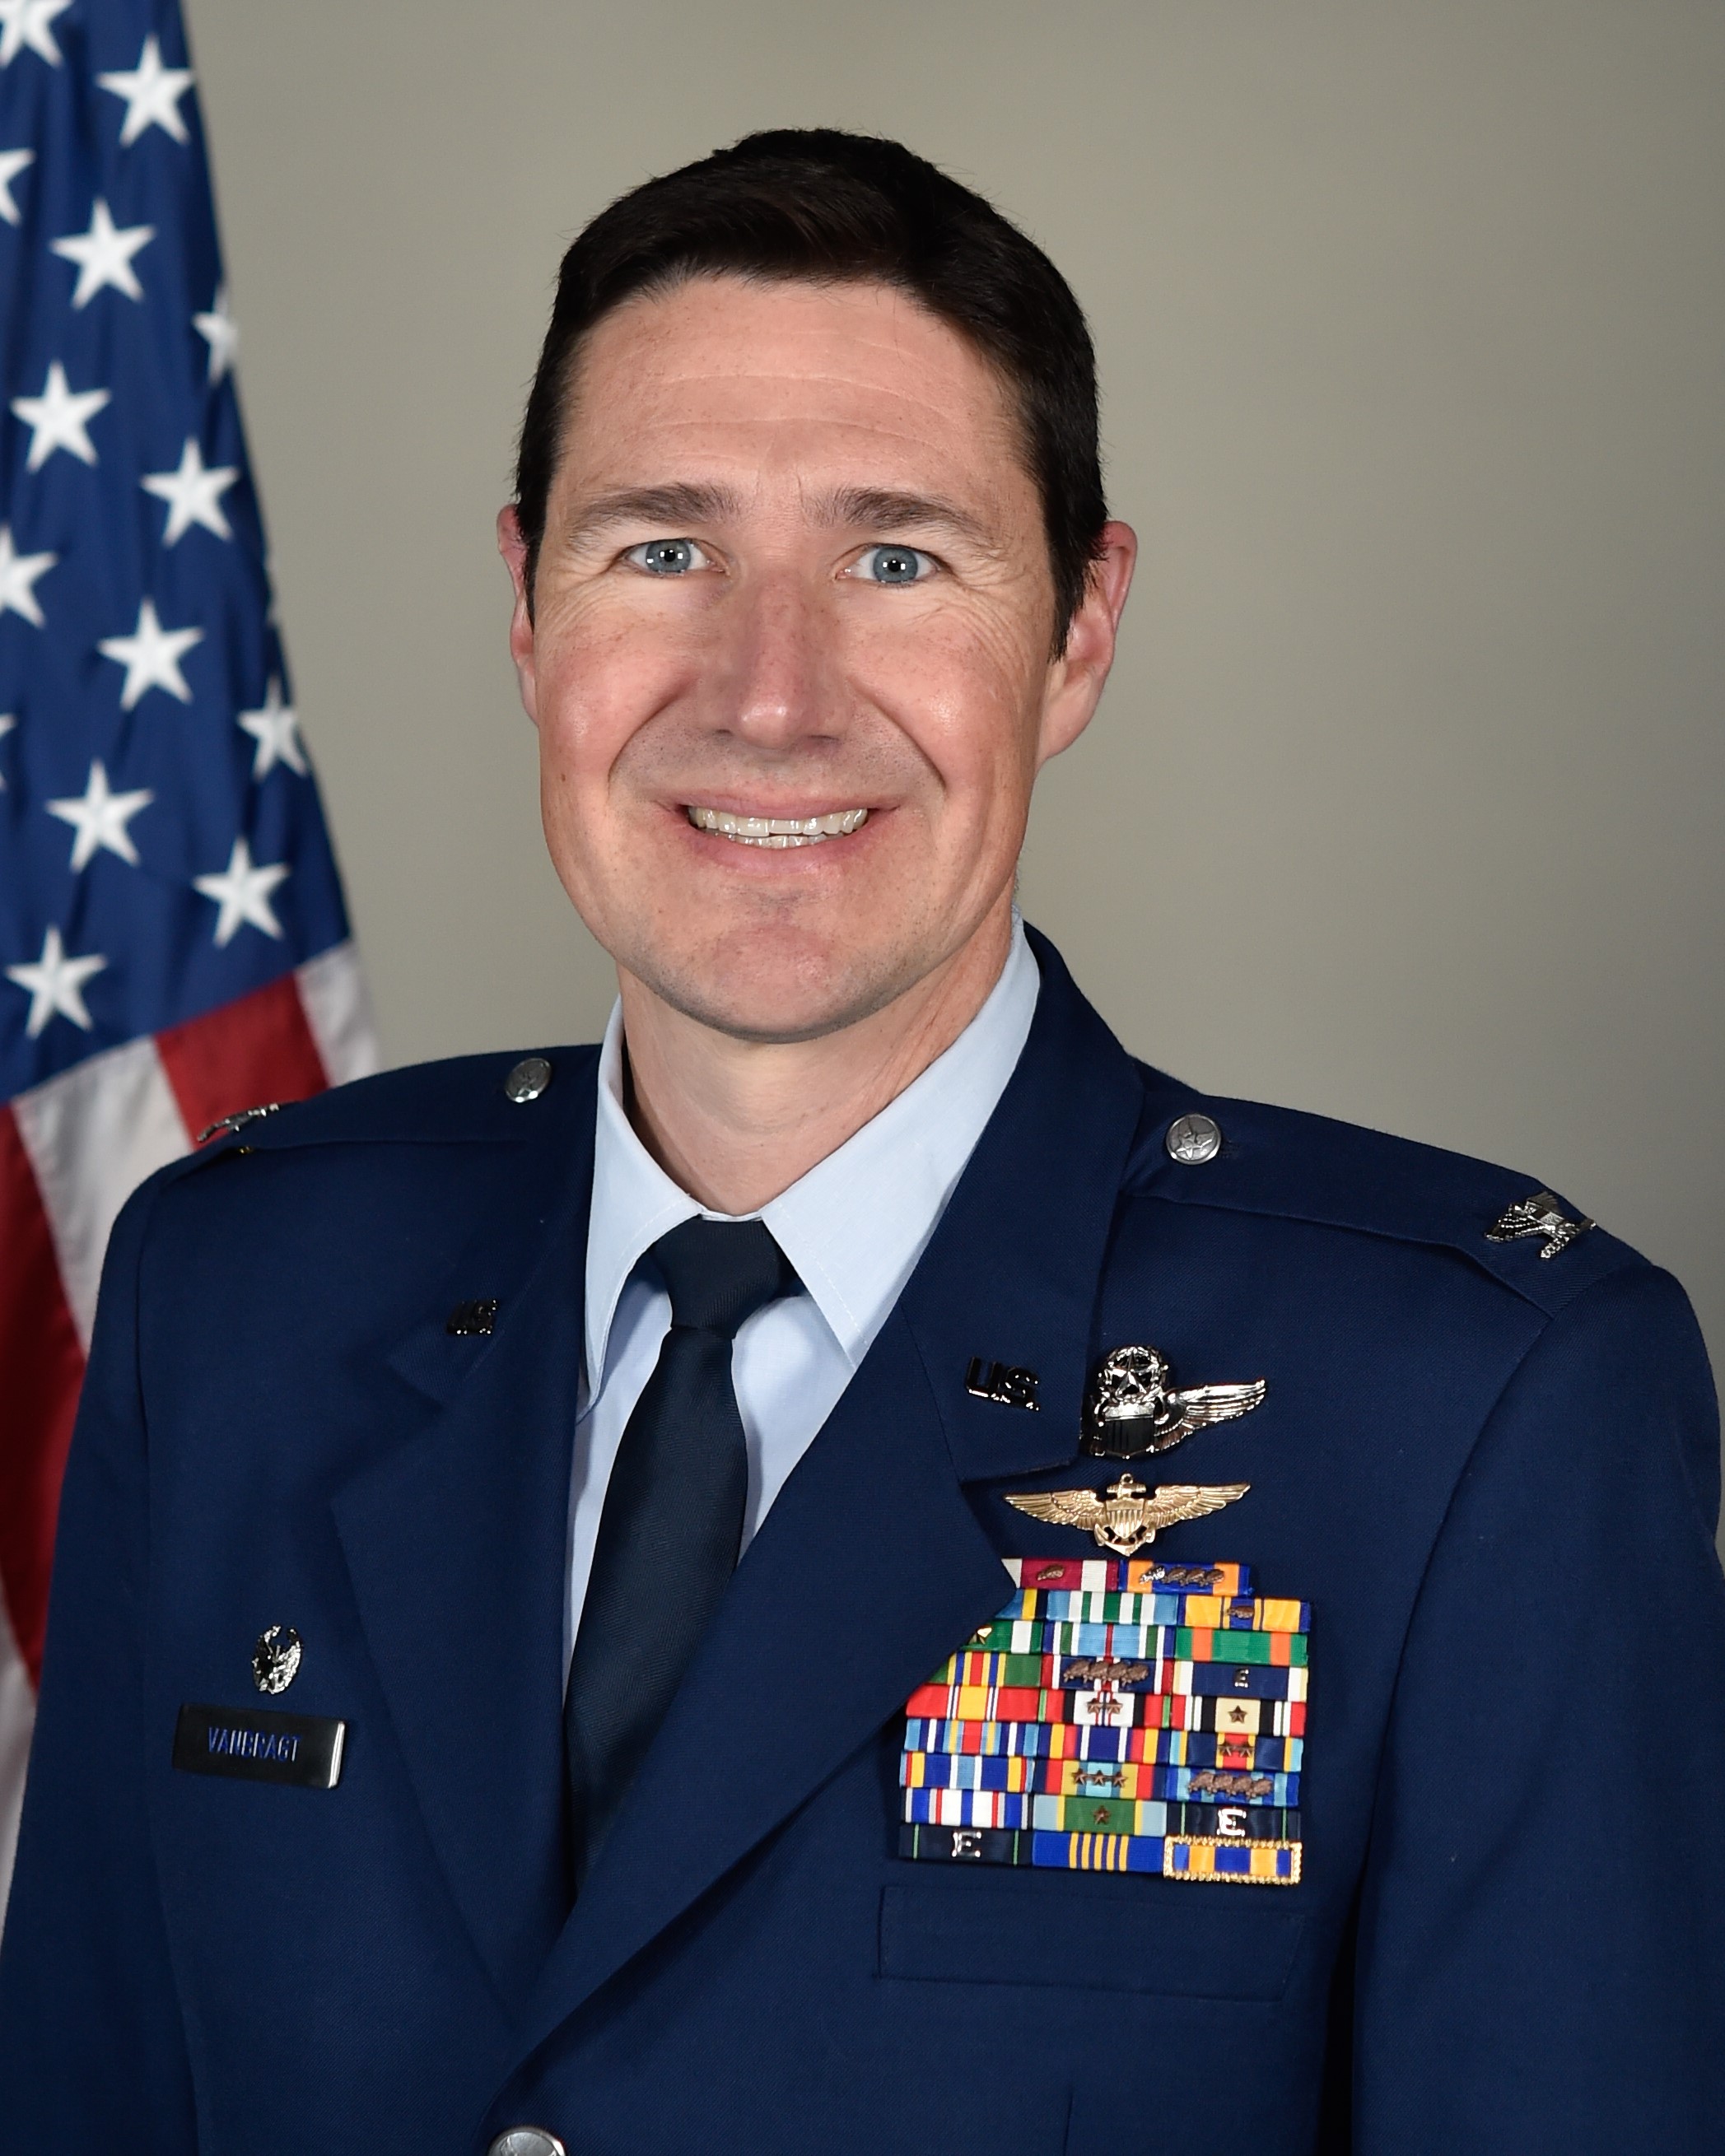 Col. Swertfager